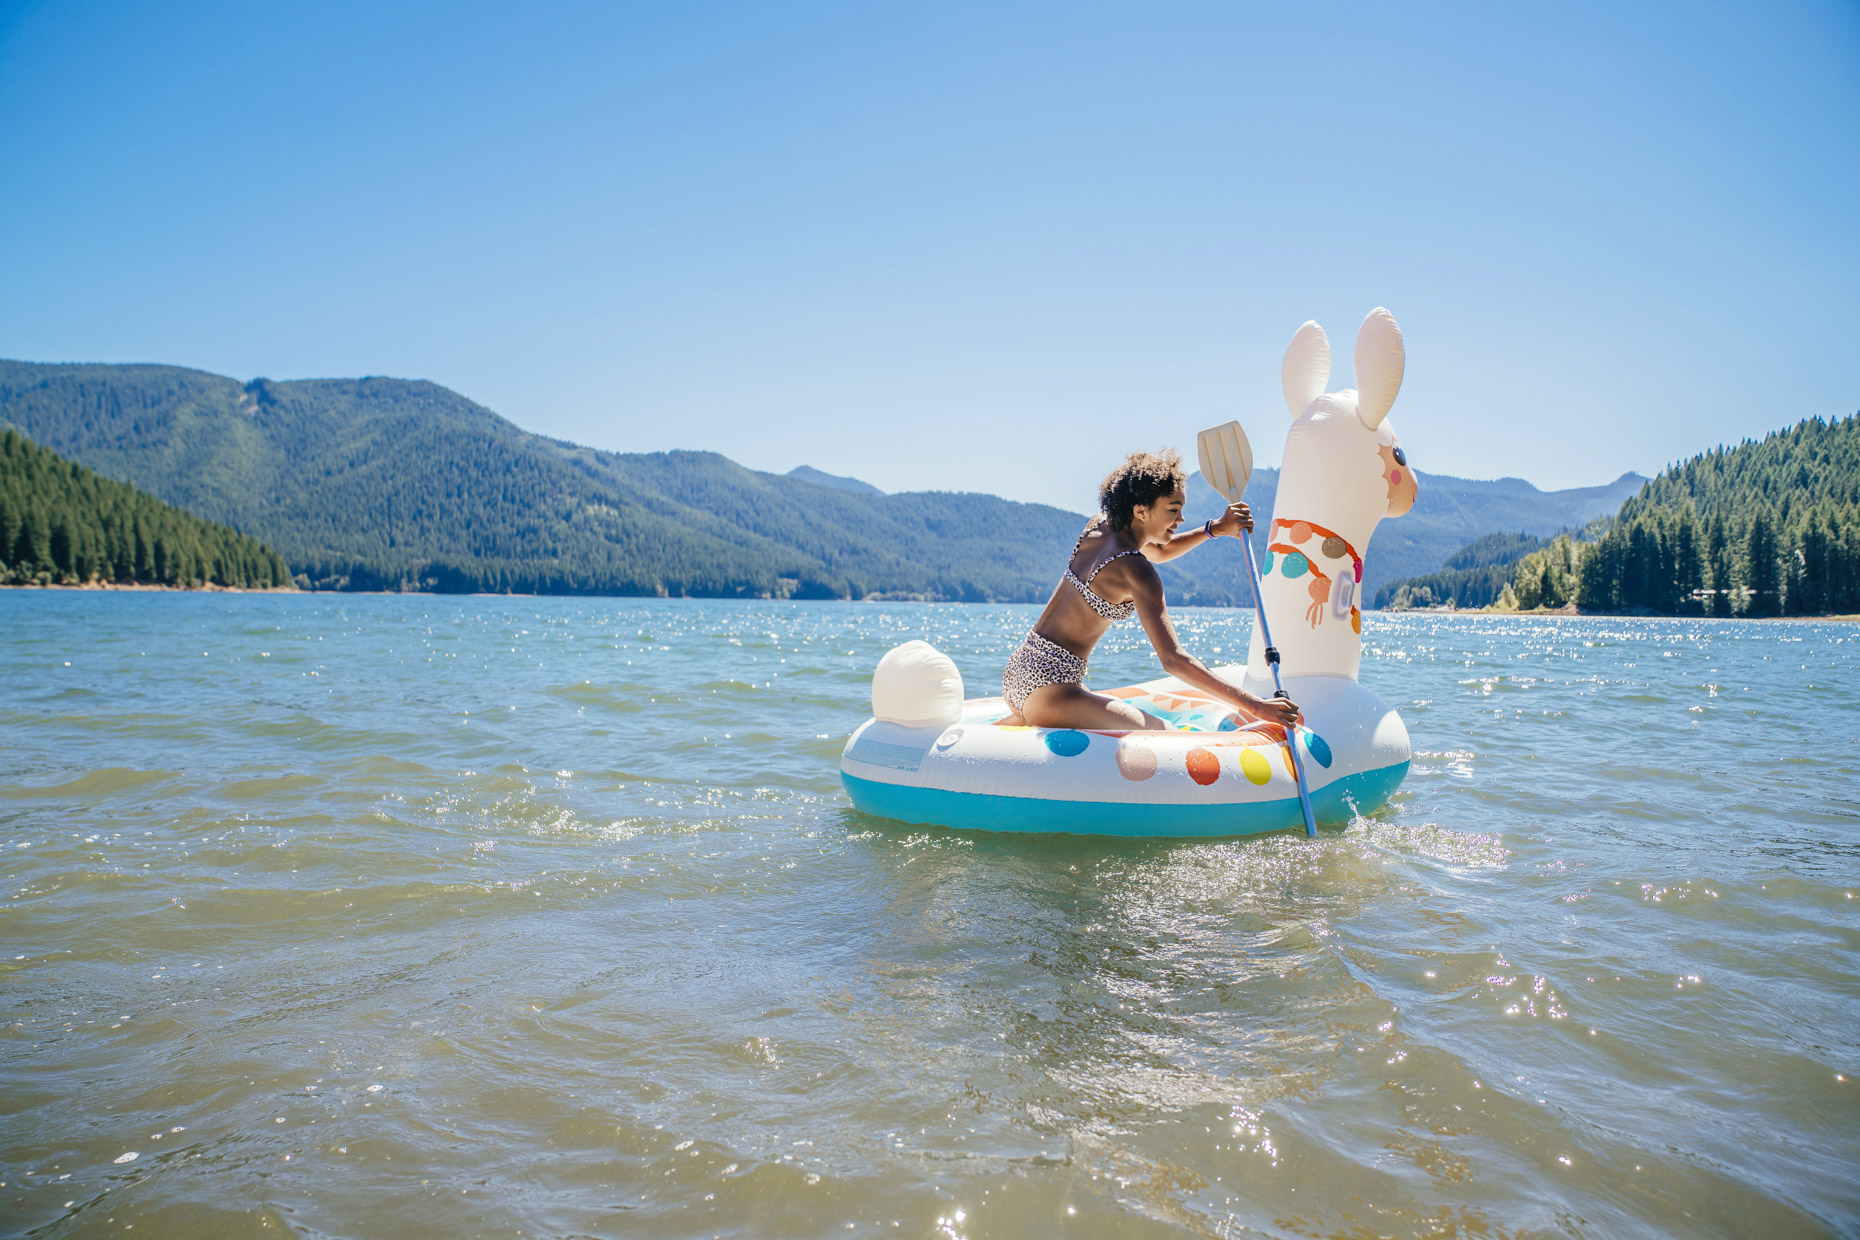 Girl paddling llama float on lake in forest